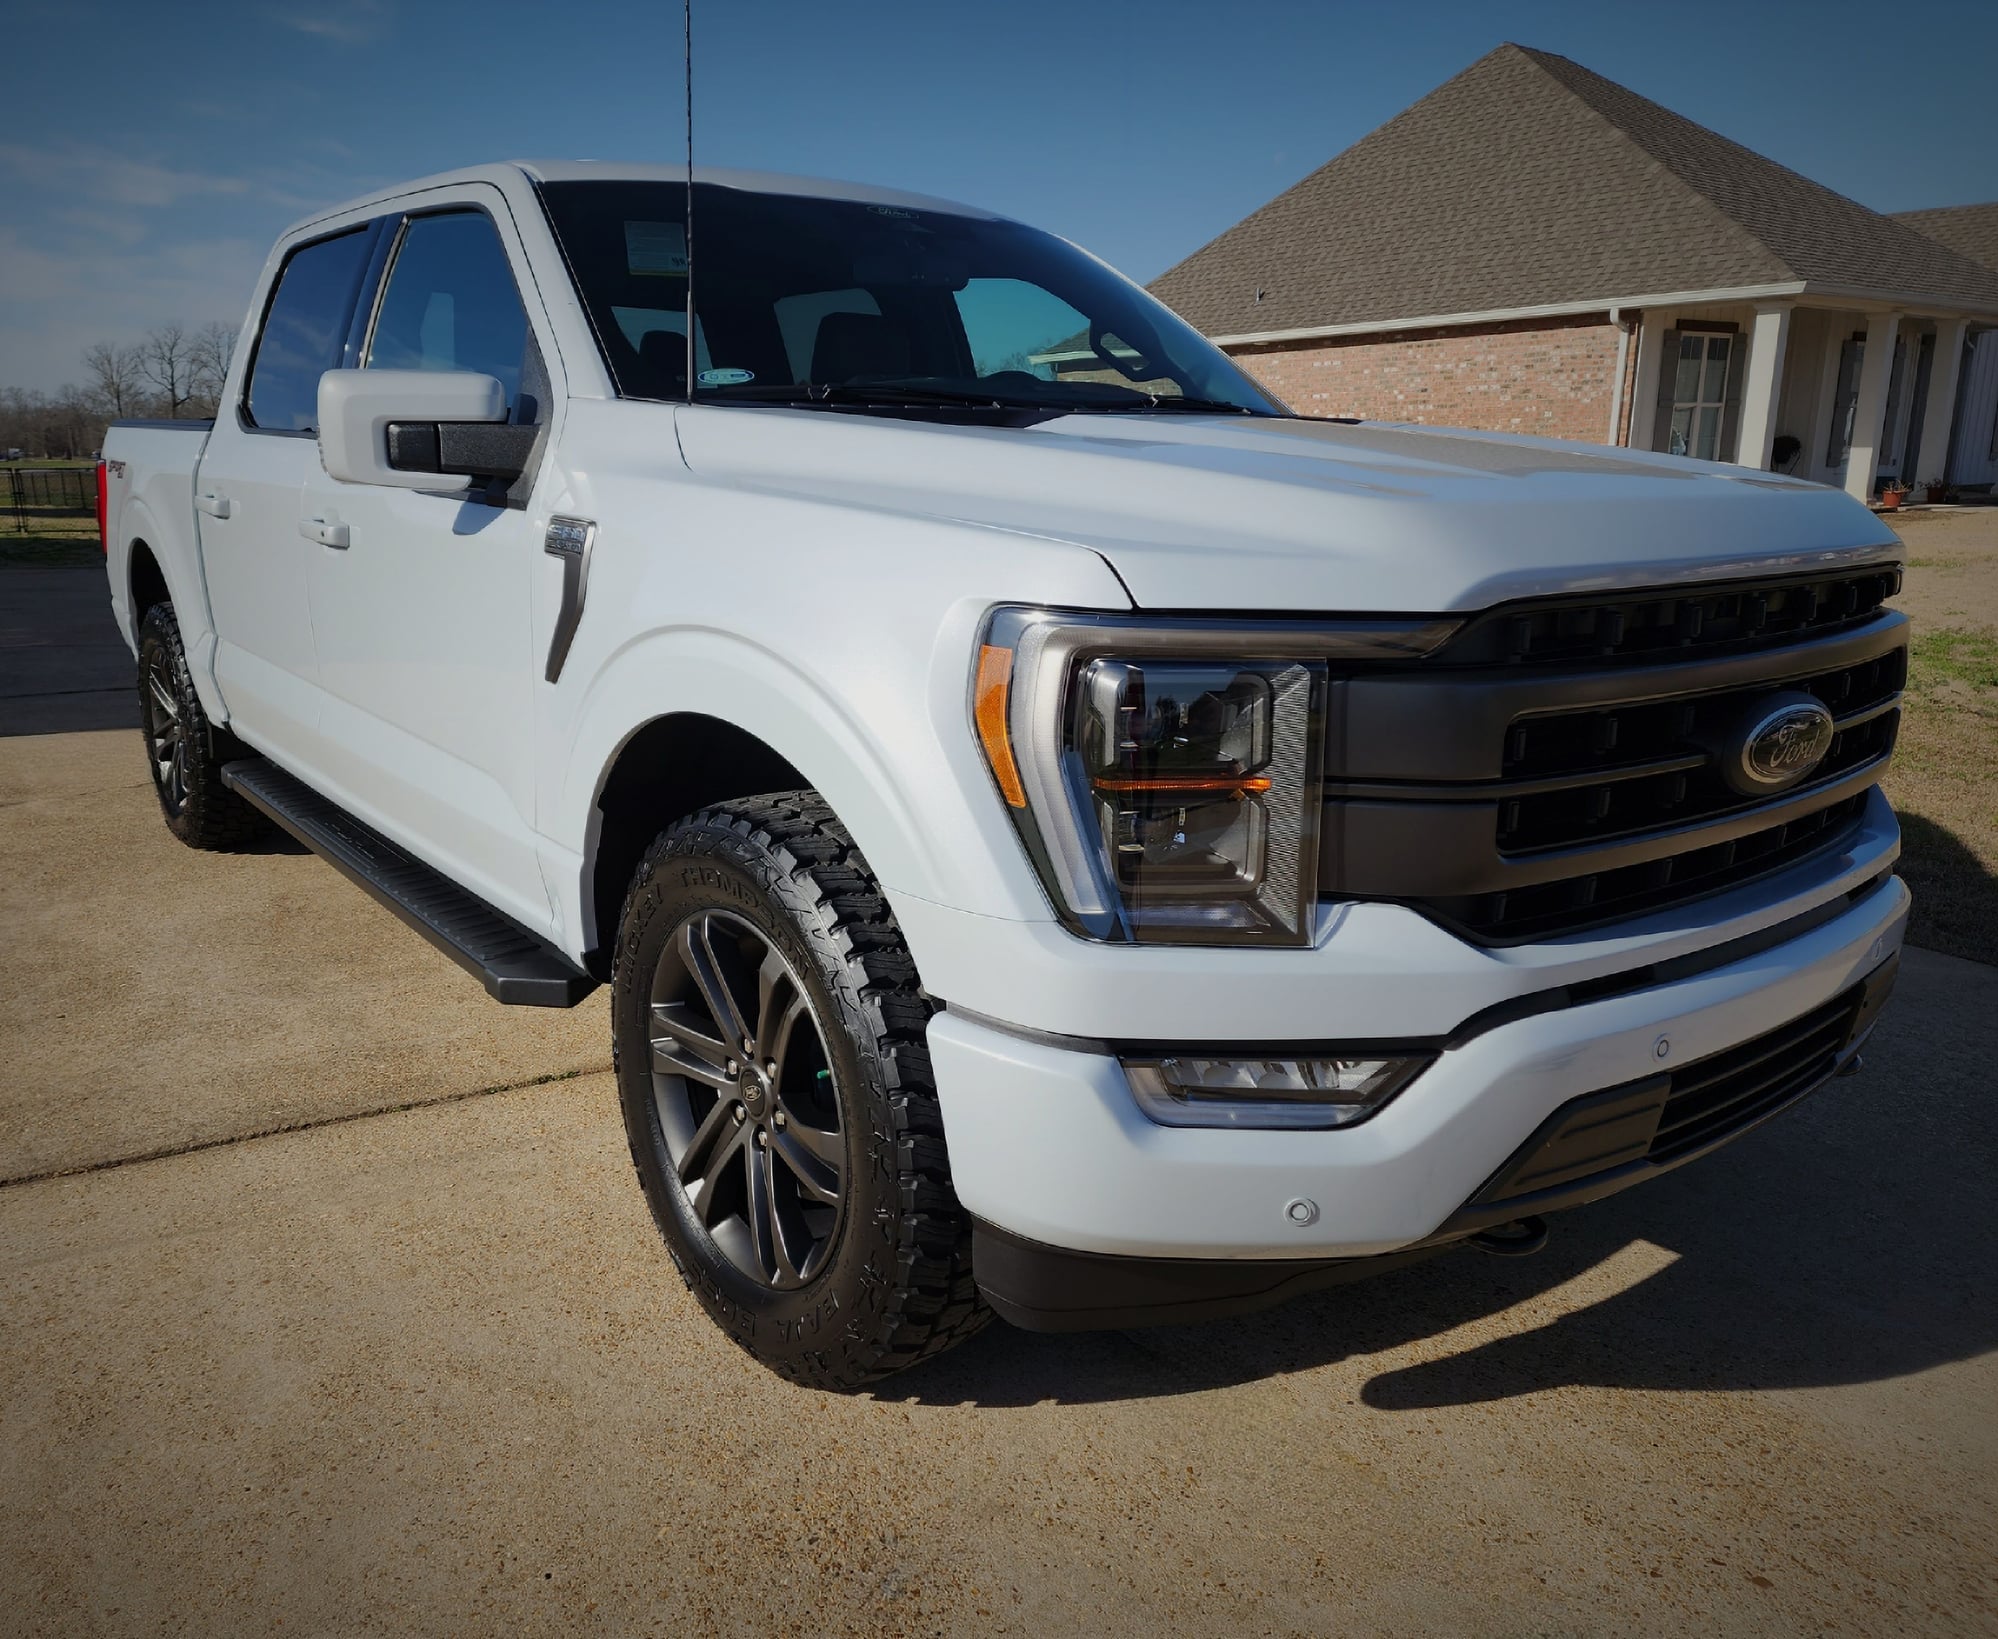 Westley's Bleche-wite - Ford F150 Forum - Community of Ford Truck Fans